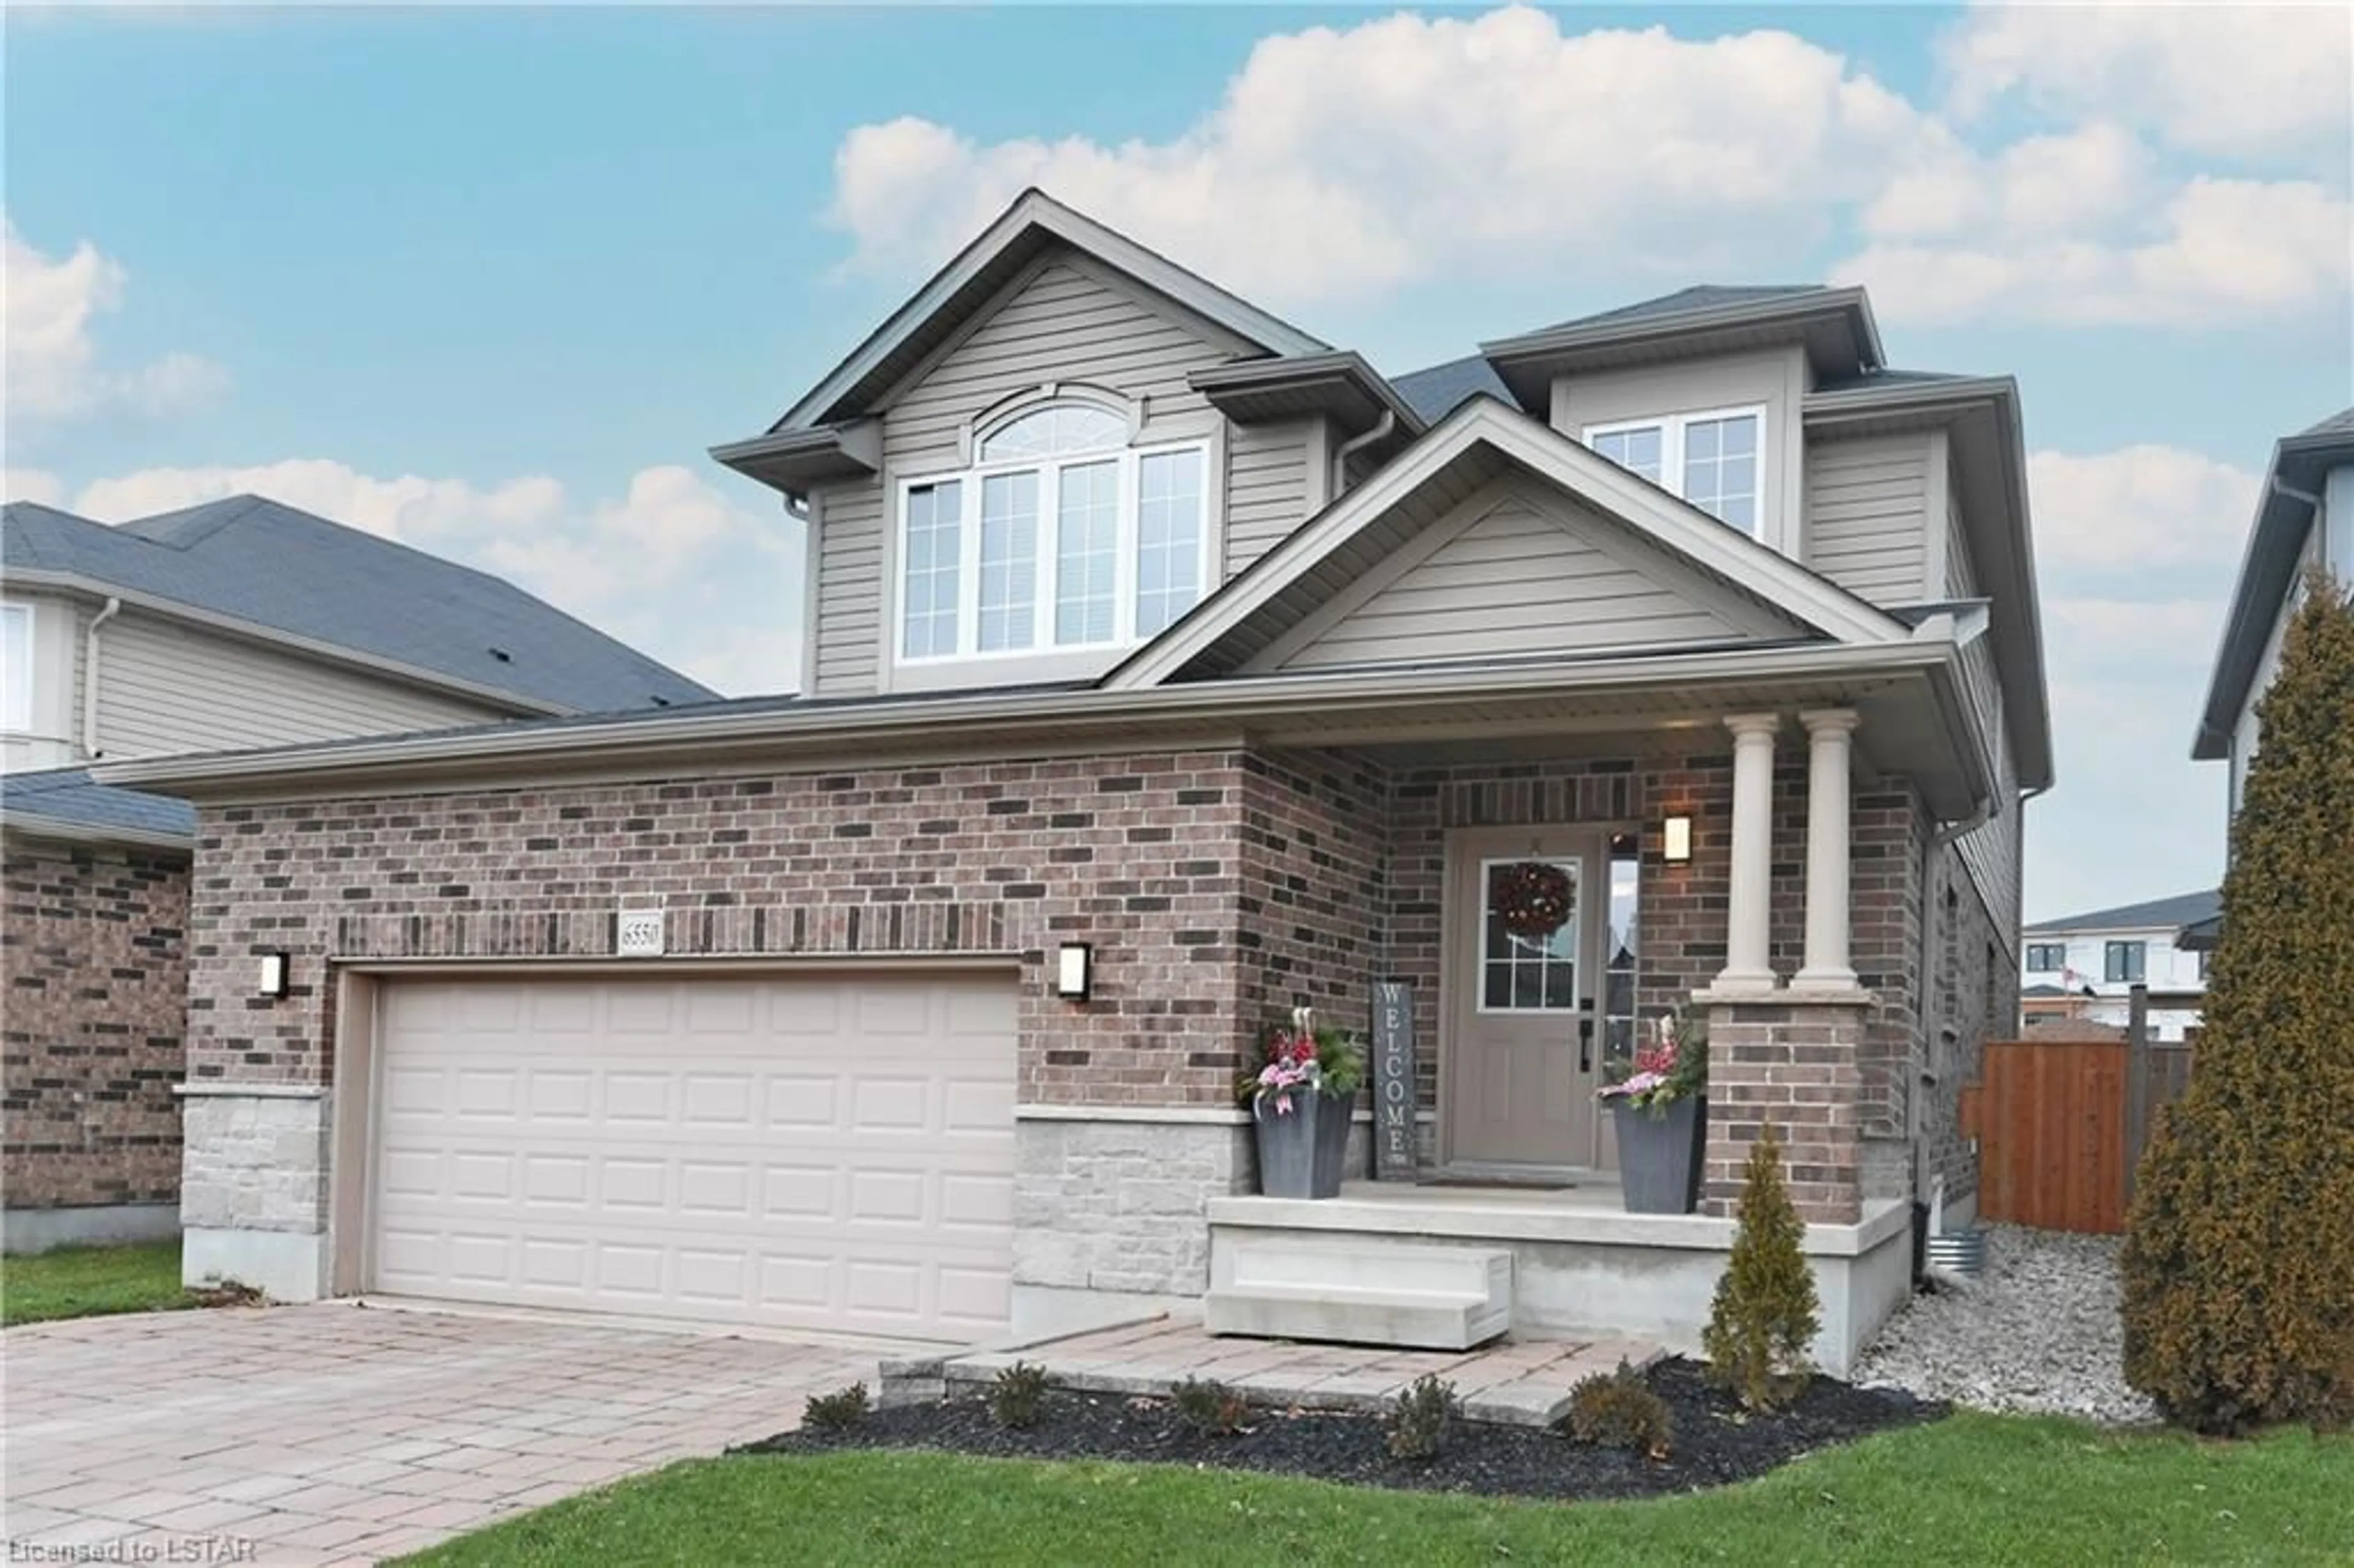 Home with brick exterior material for 6550 Raleigh Blvd, London Ontario N6P 0B9